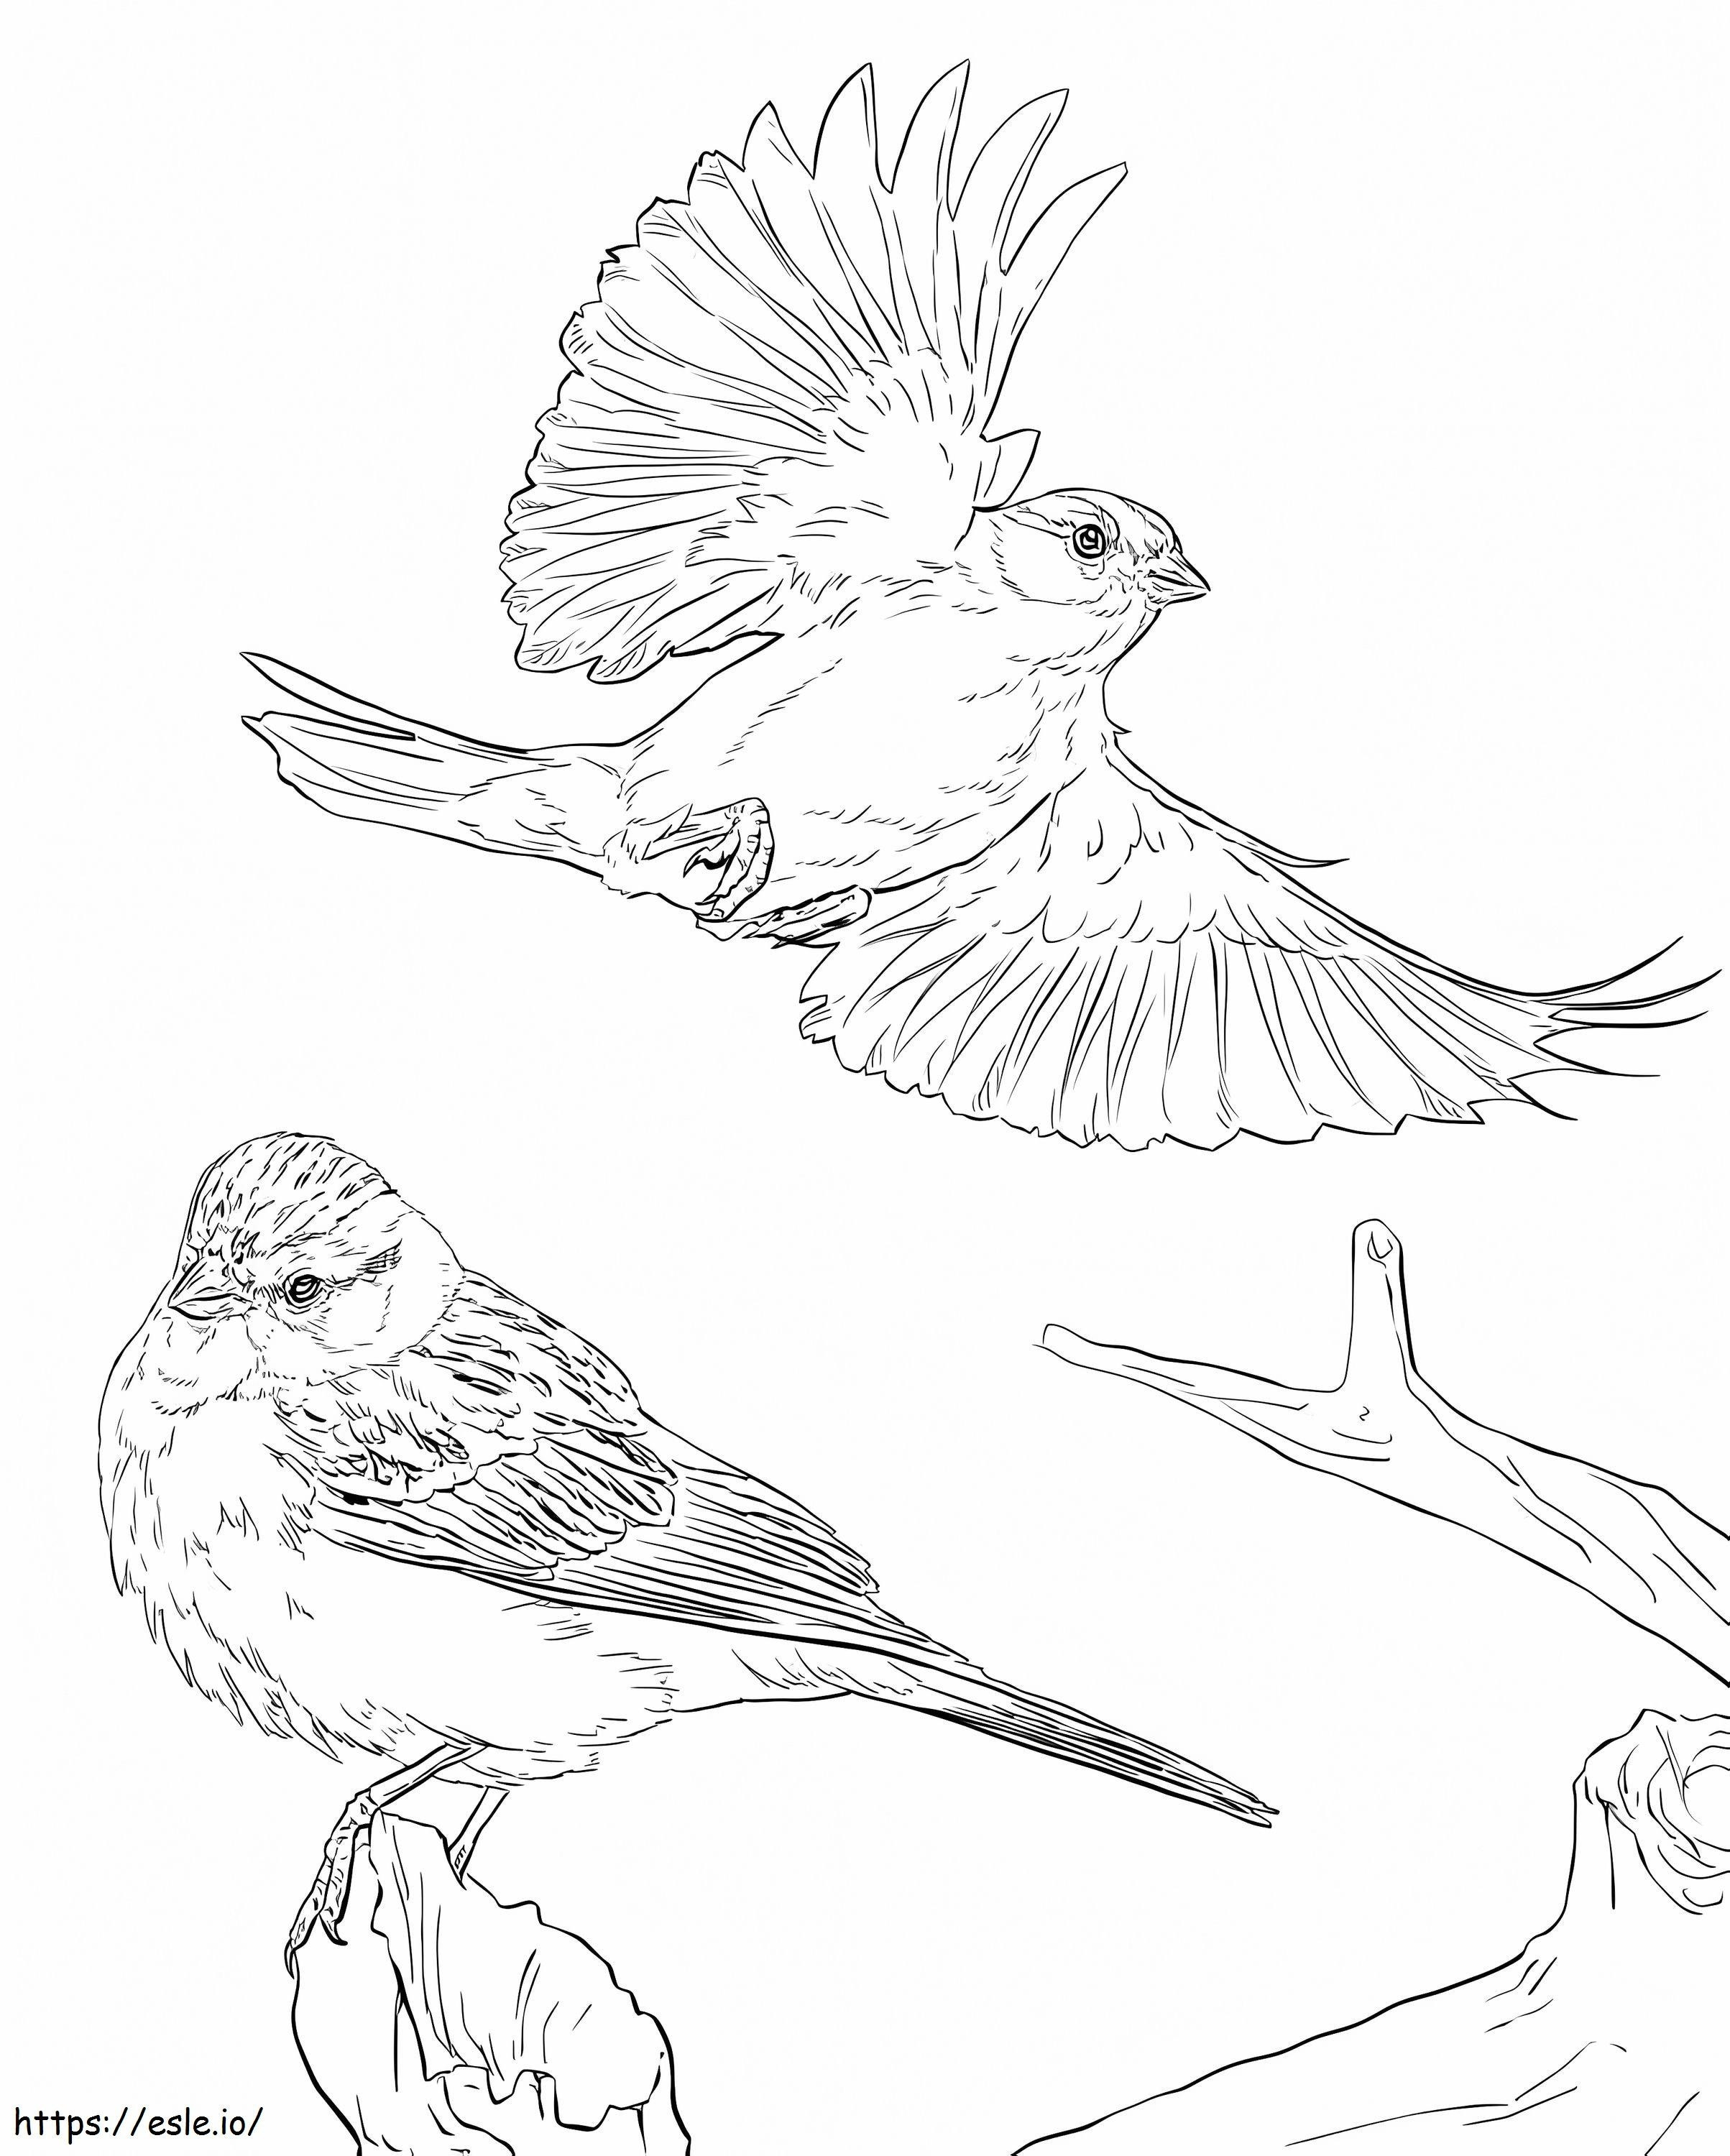 Chipping Sparrows coloring page